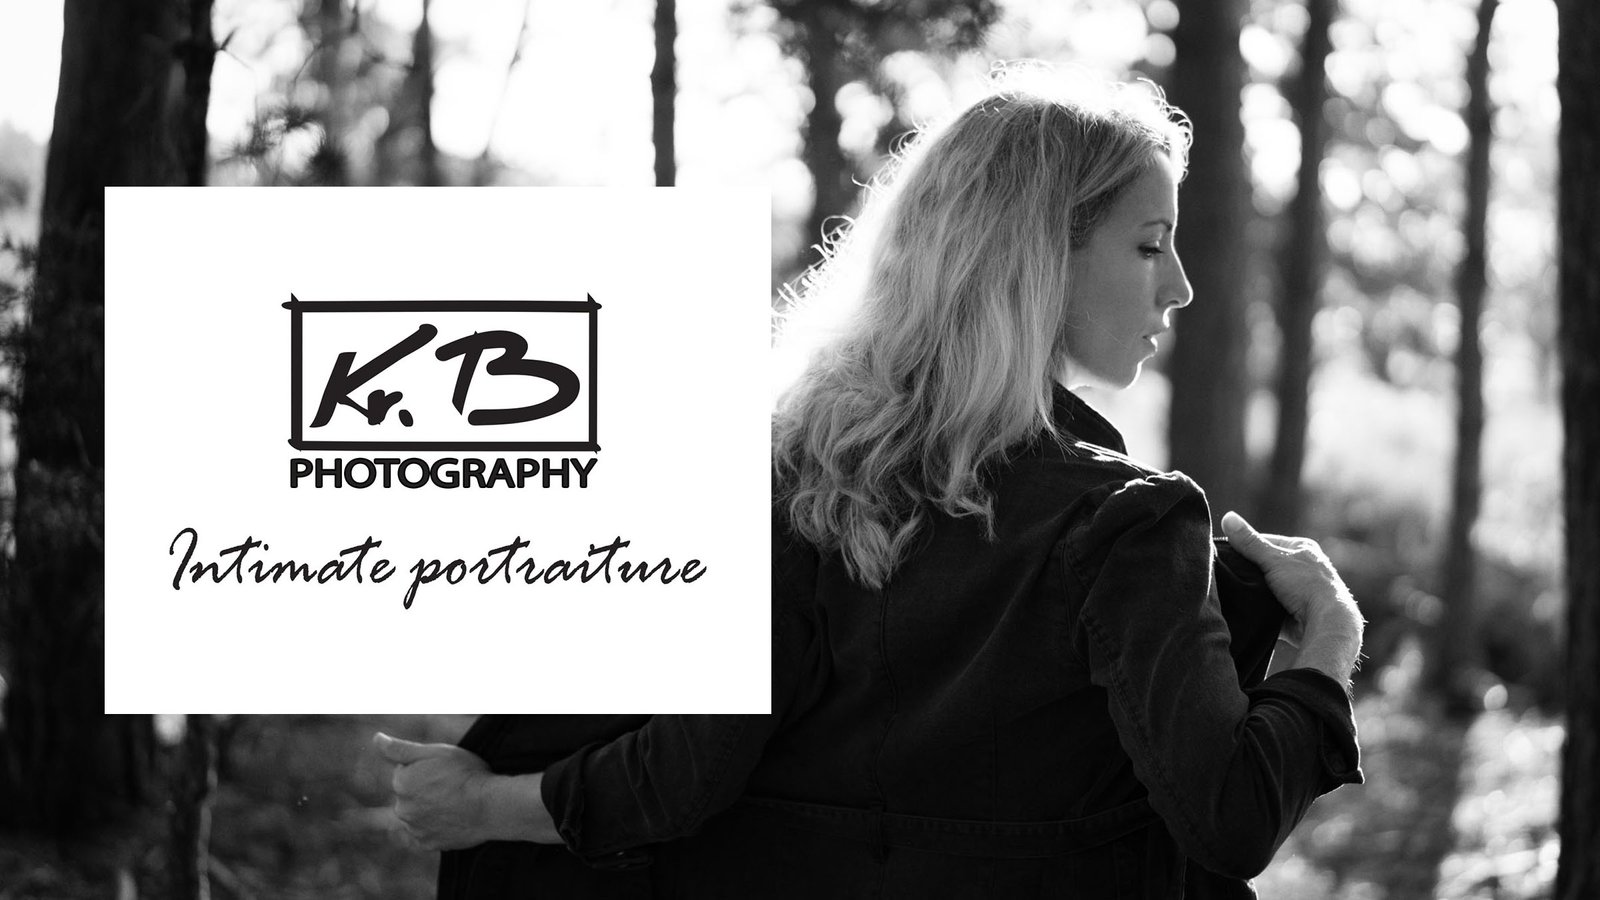 KrB Photography, cover photo 5